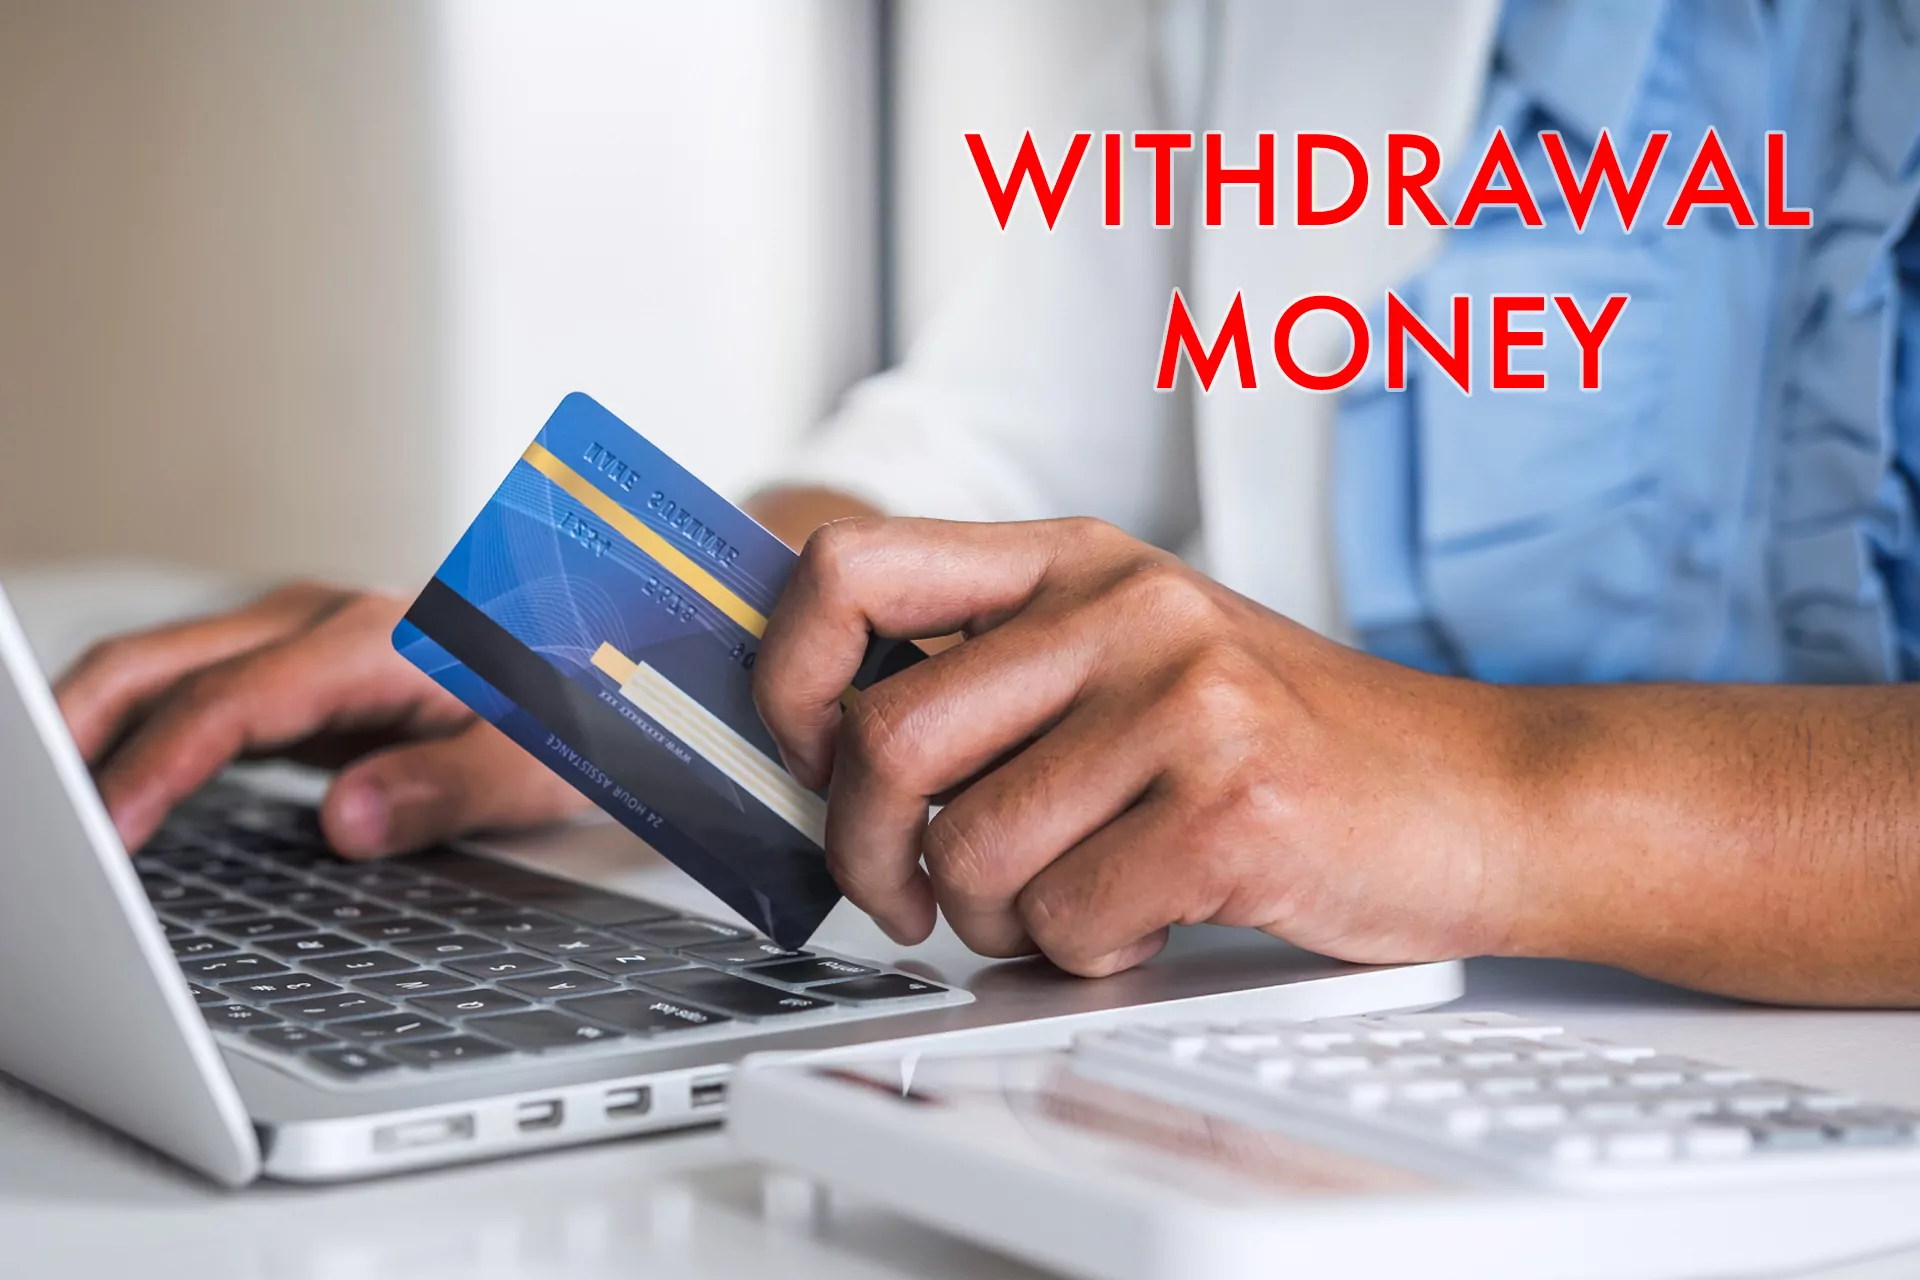 If your bet wins, you can withdraw money according to the rules of your bookmaker.